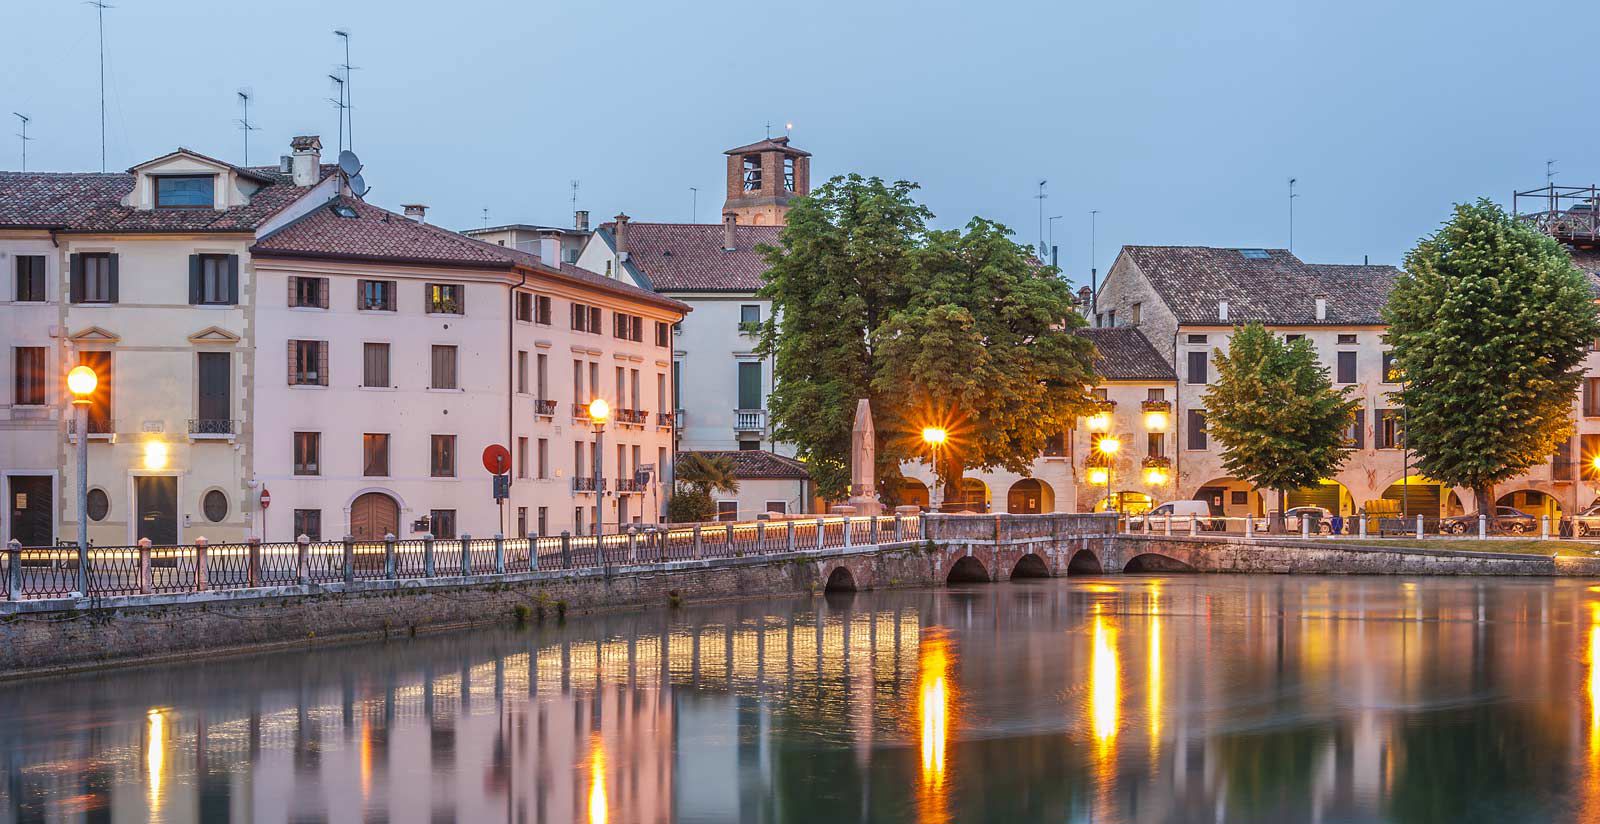 Book at Hotel Carlton to visit Treviso and surroundings!